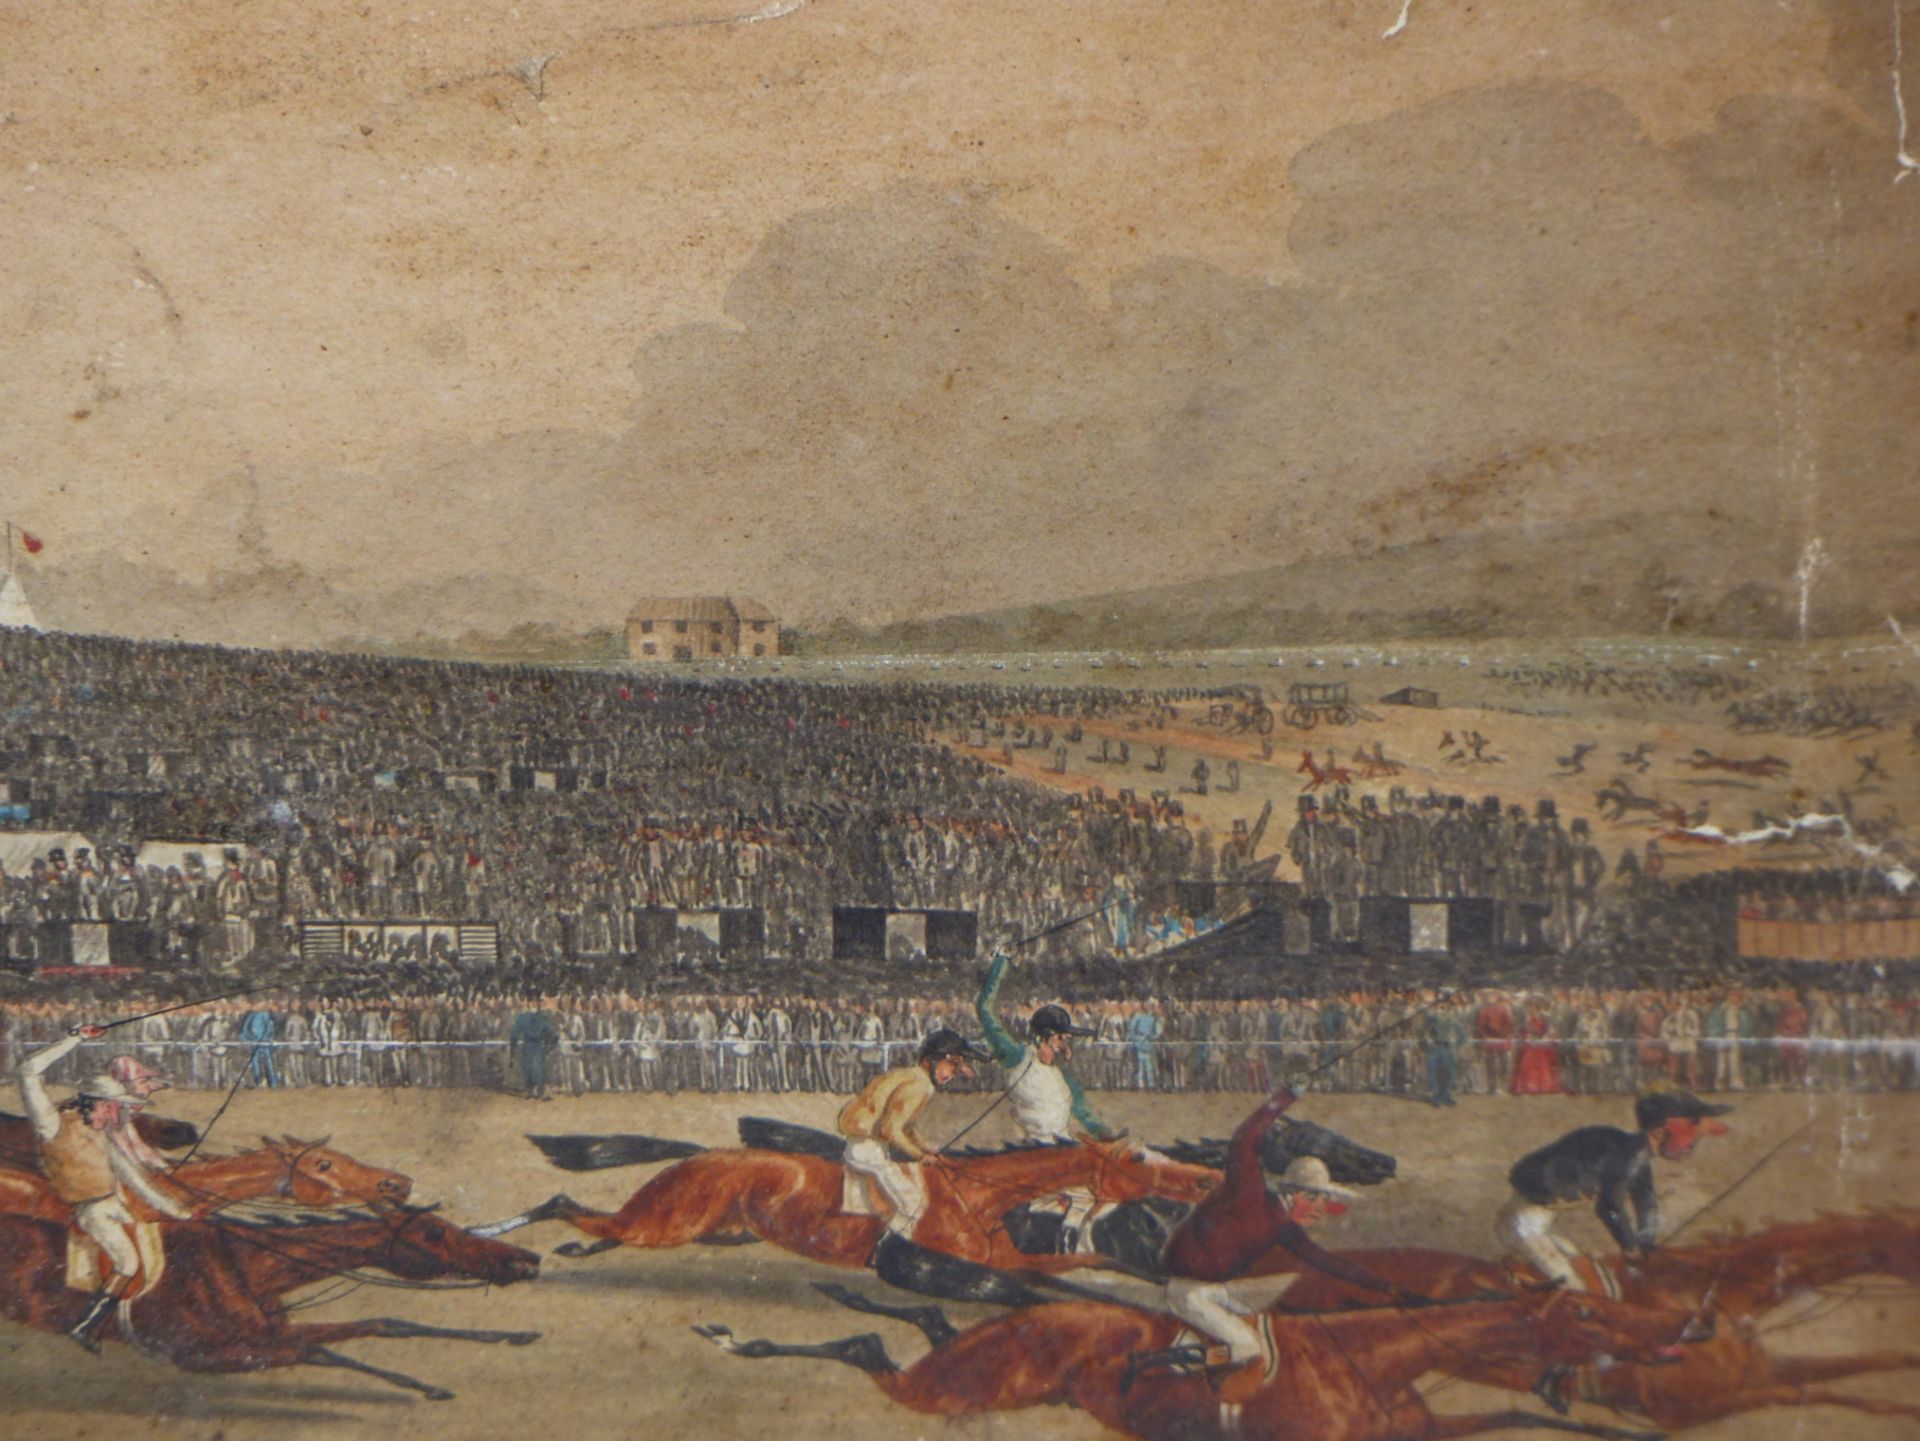 19th C. ENGLISH SCHOOL DANIEL O'ROUKE WINNING HE DERBY 1852, REPUTEDLY BY JAMES G. NOBLE, - Image 5 of 26